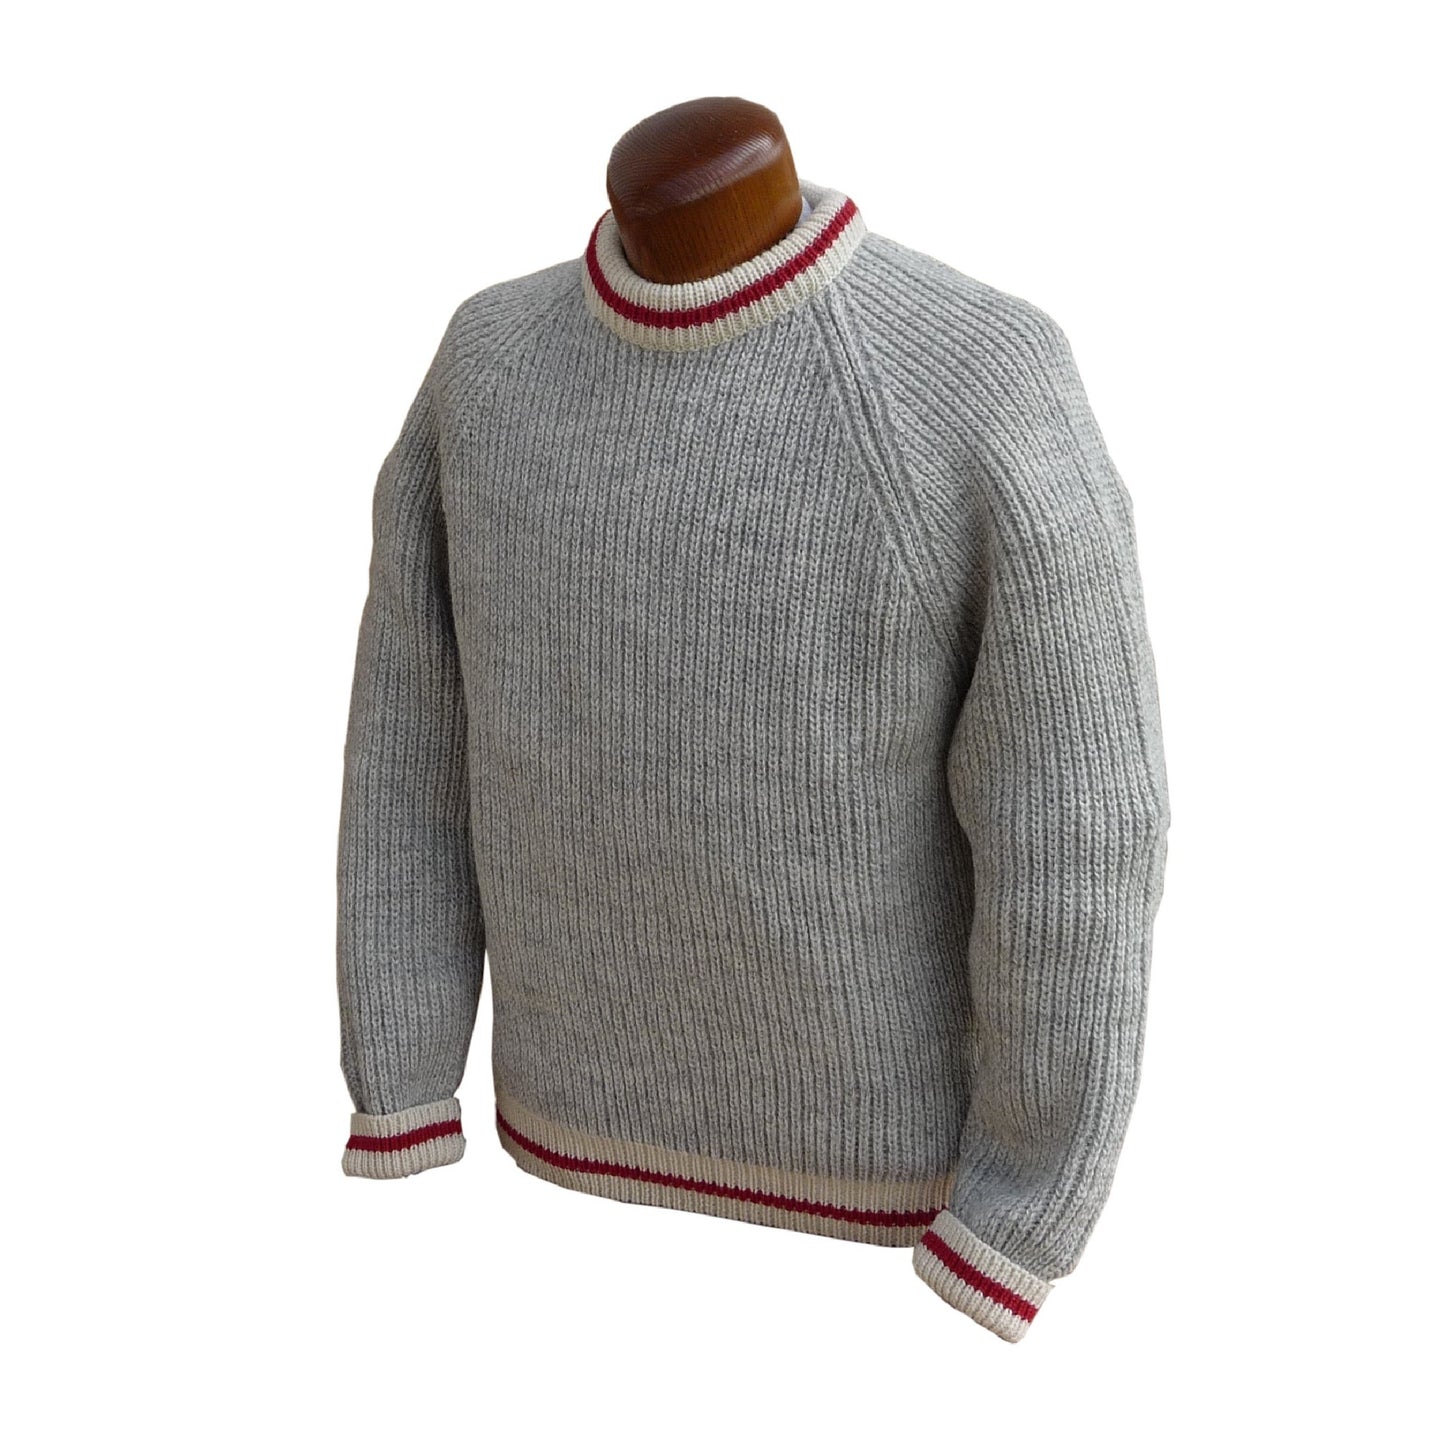 100% Wool Worksock Sweater. Made in Canada